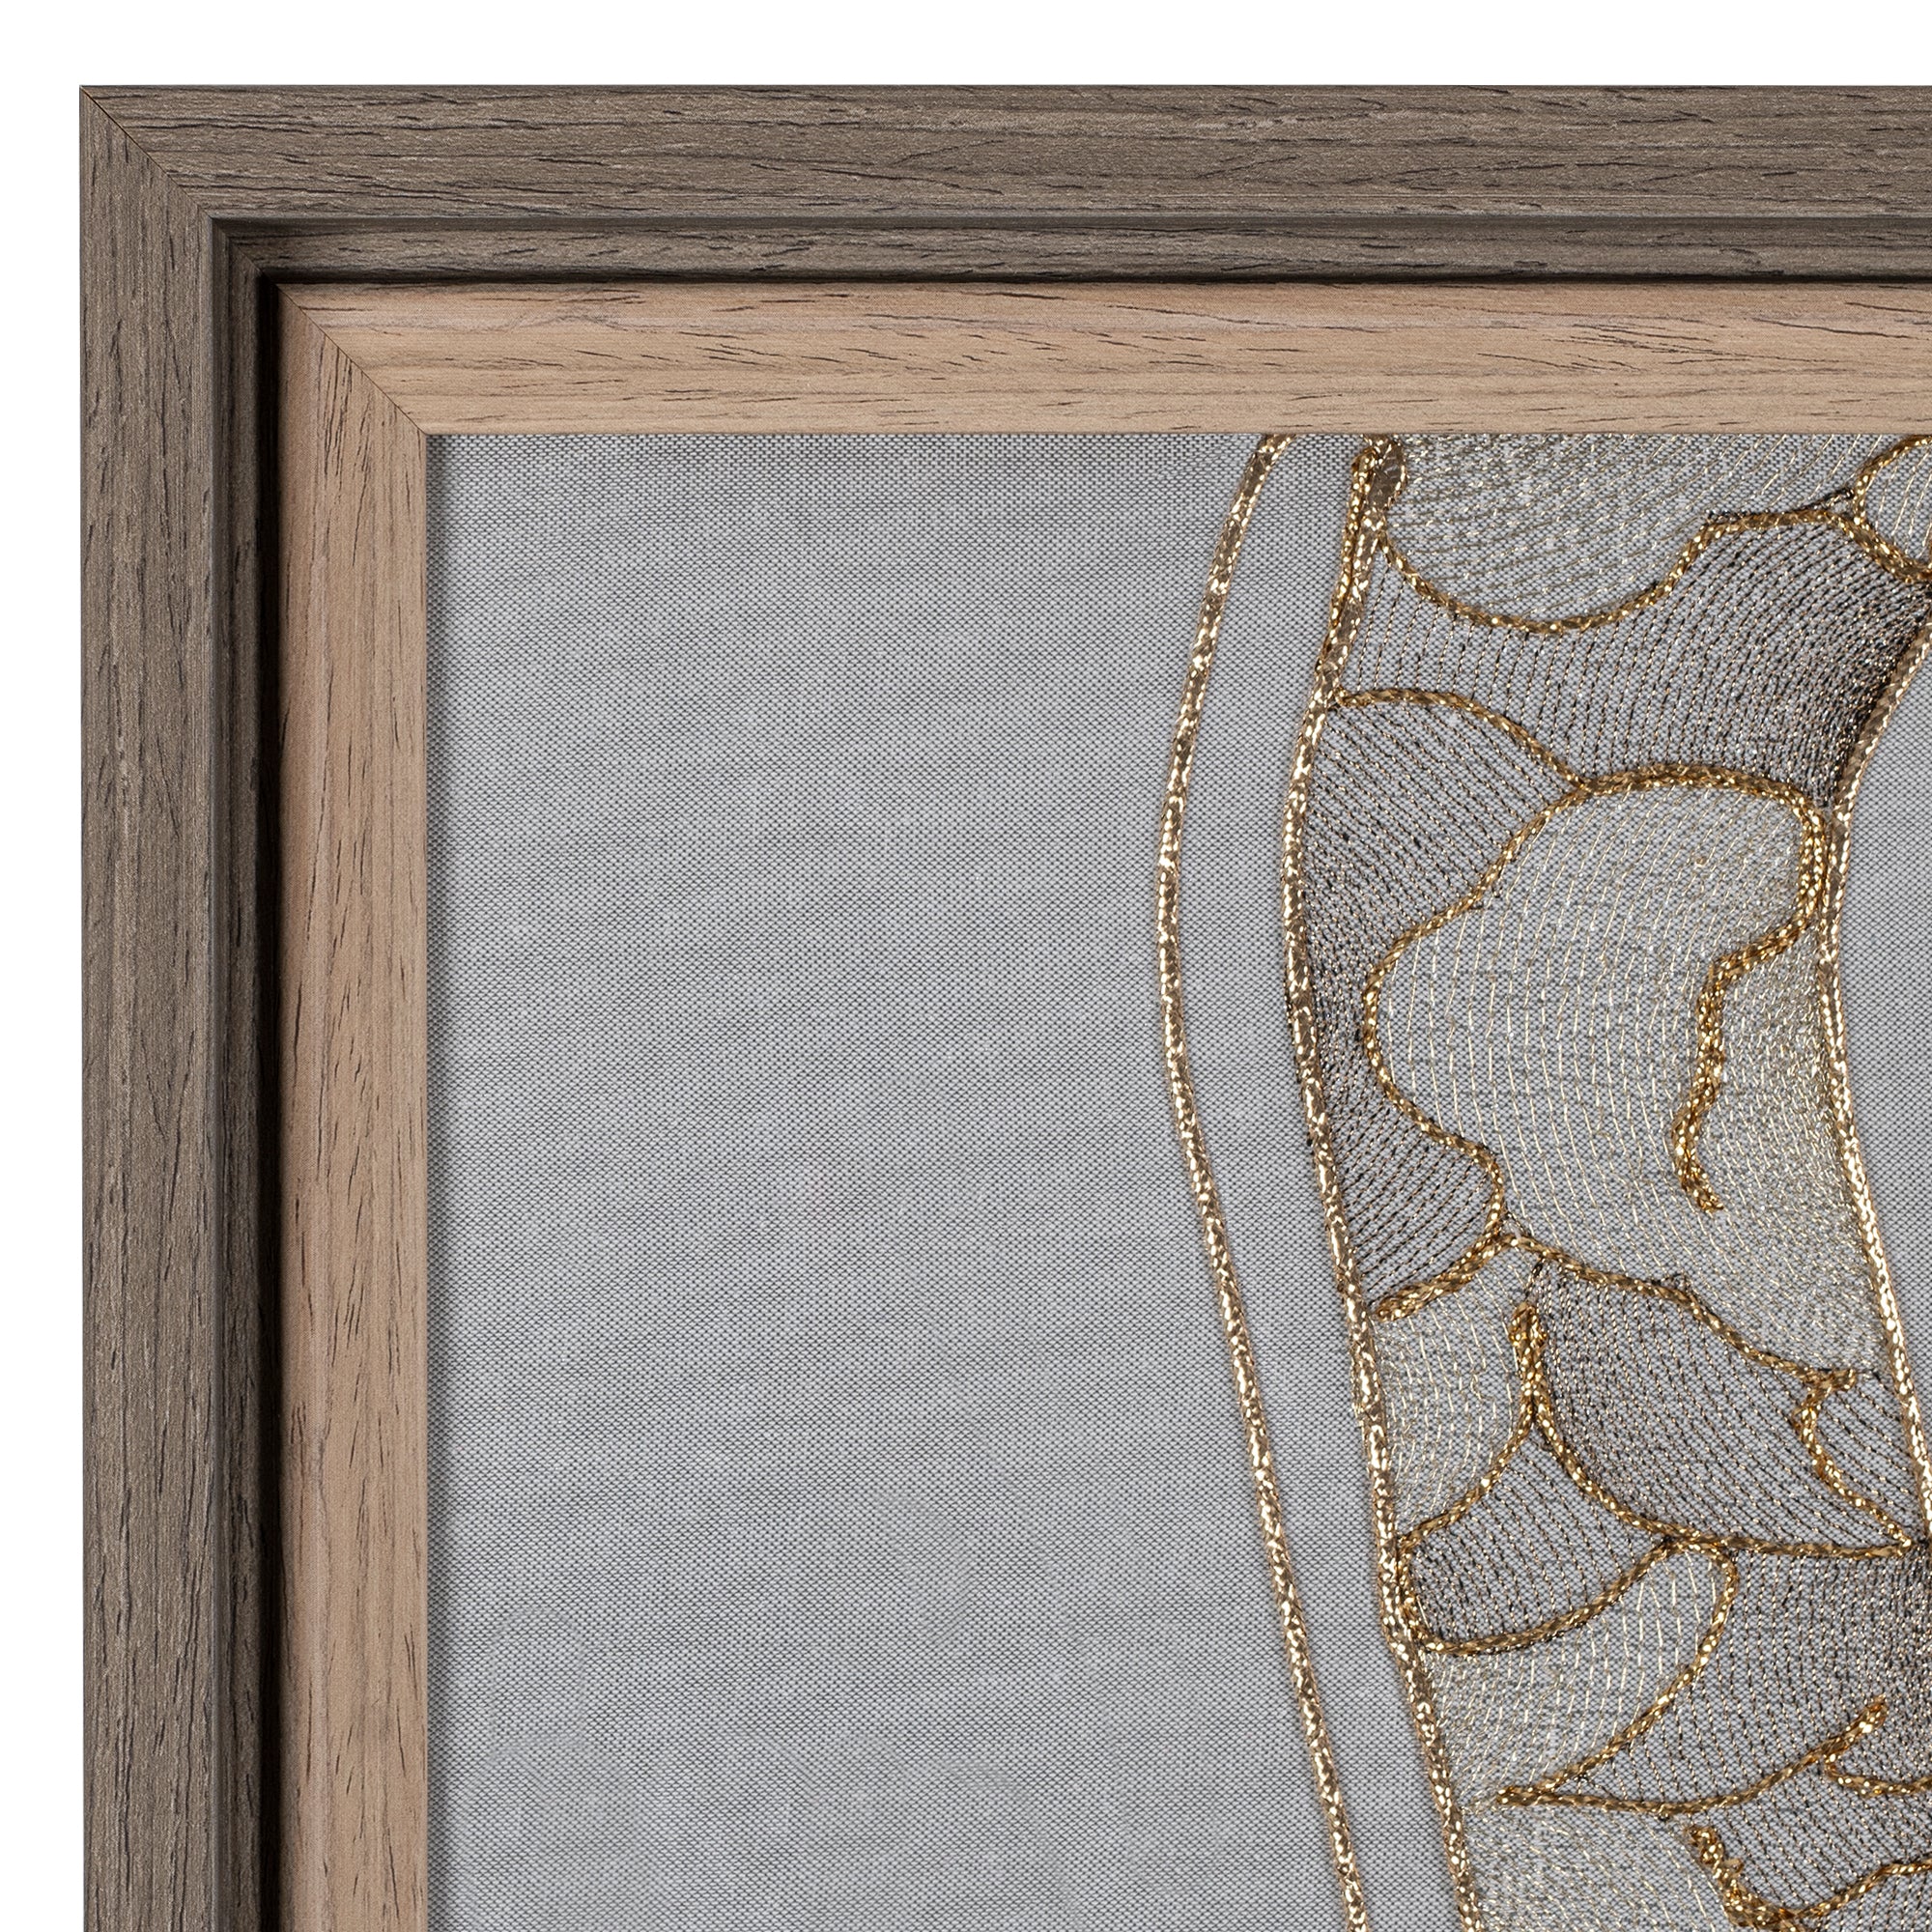 Tis embroidery artwork with high-quality wooden frame.